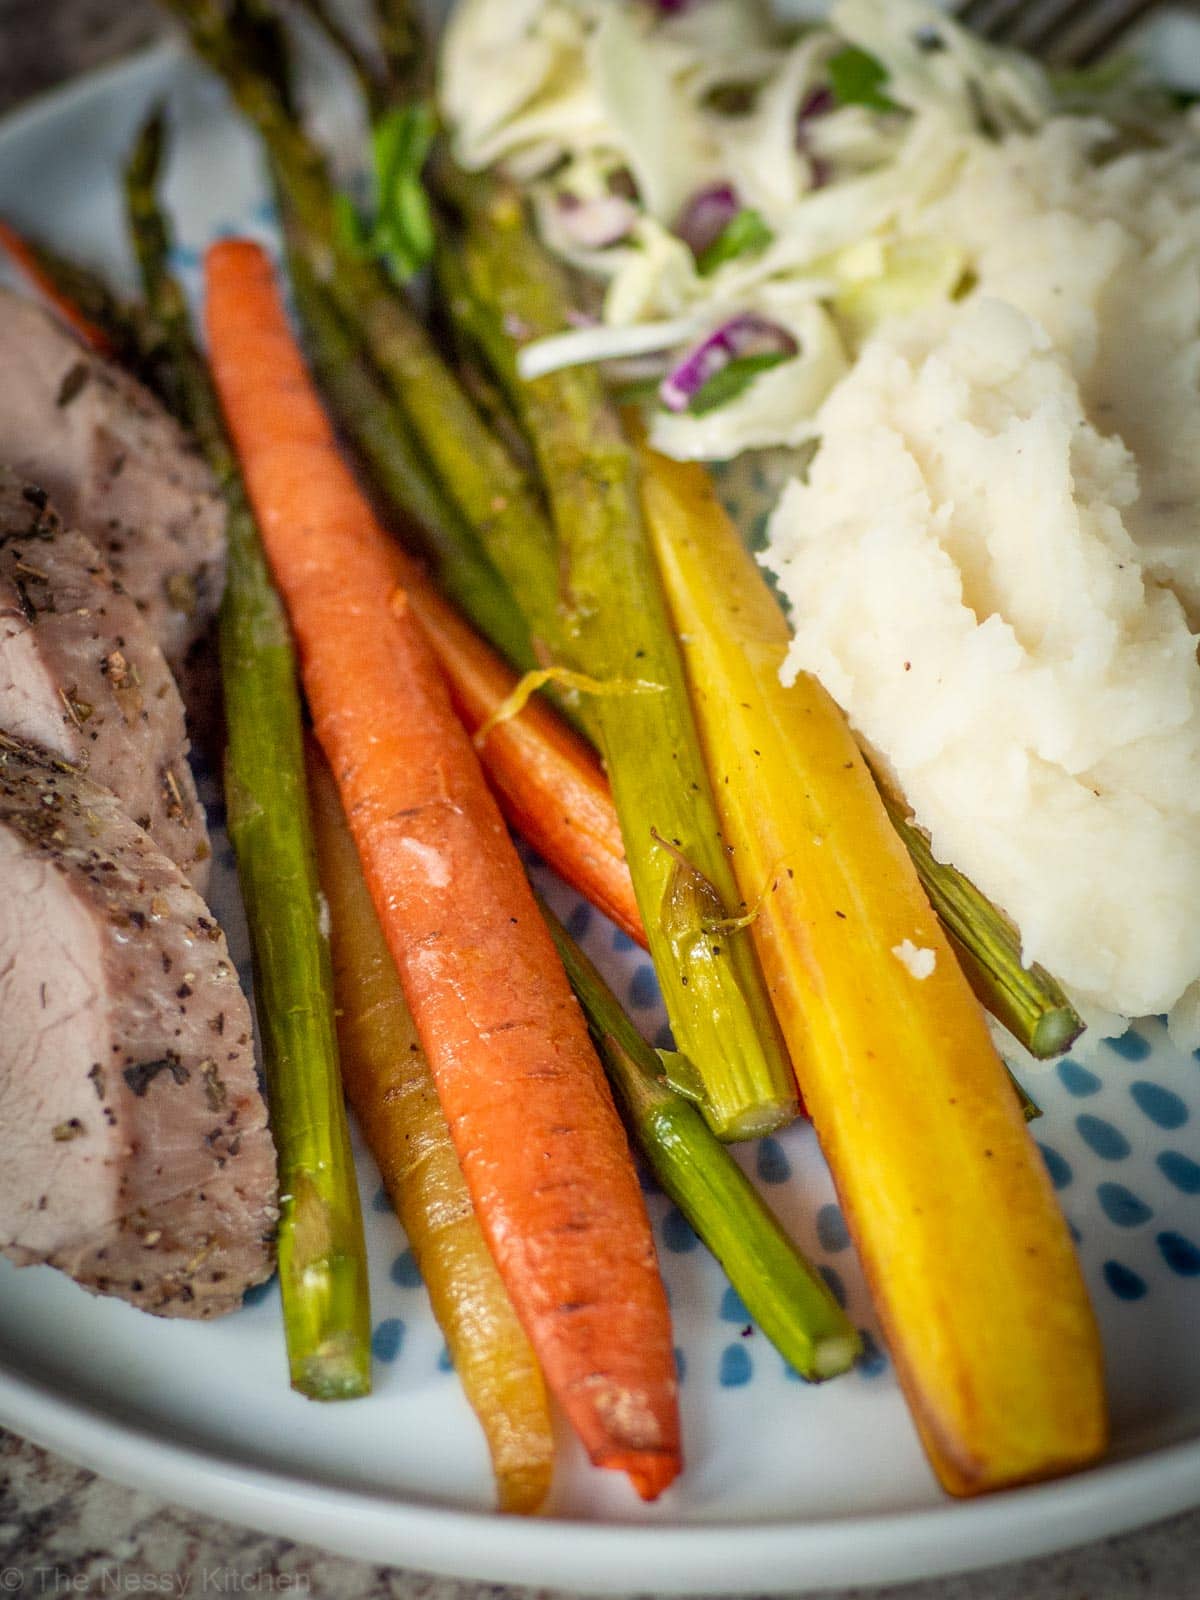 Carrots and asparagus on a plate with potatoes and pork.